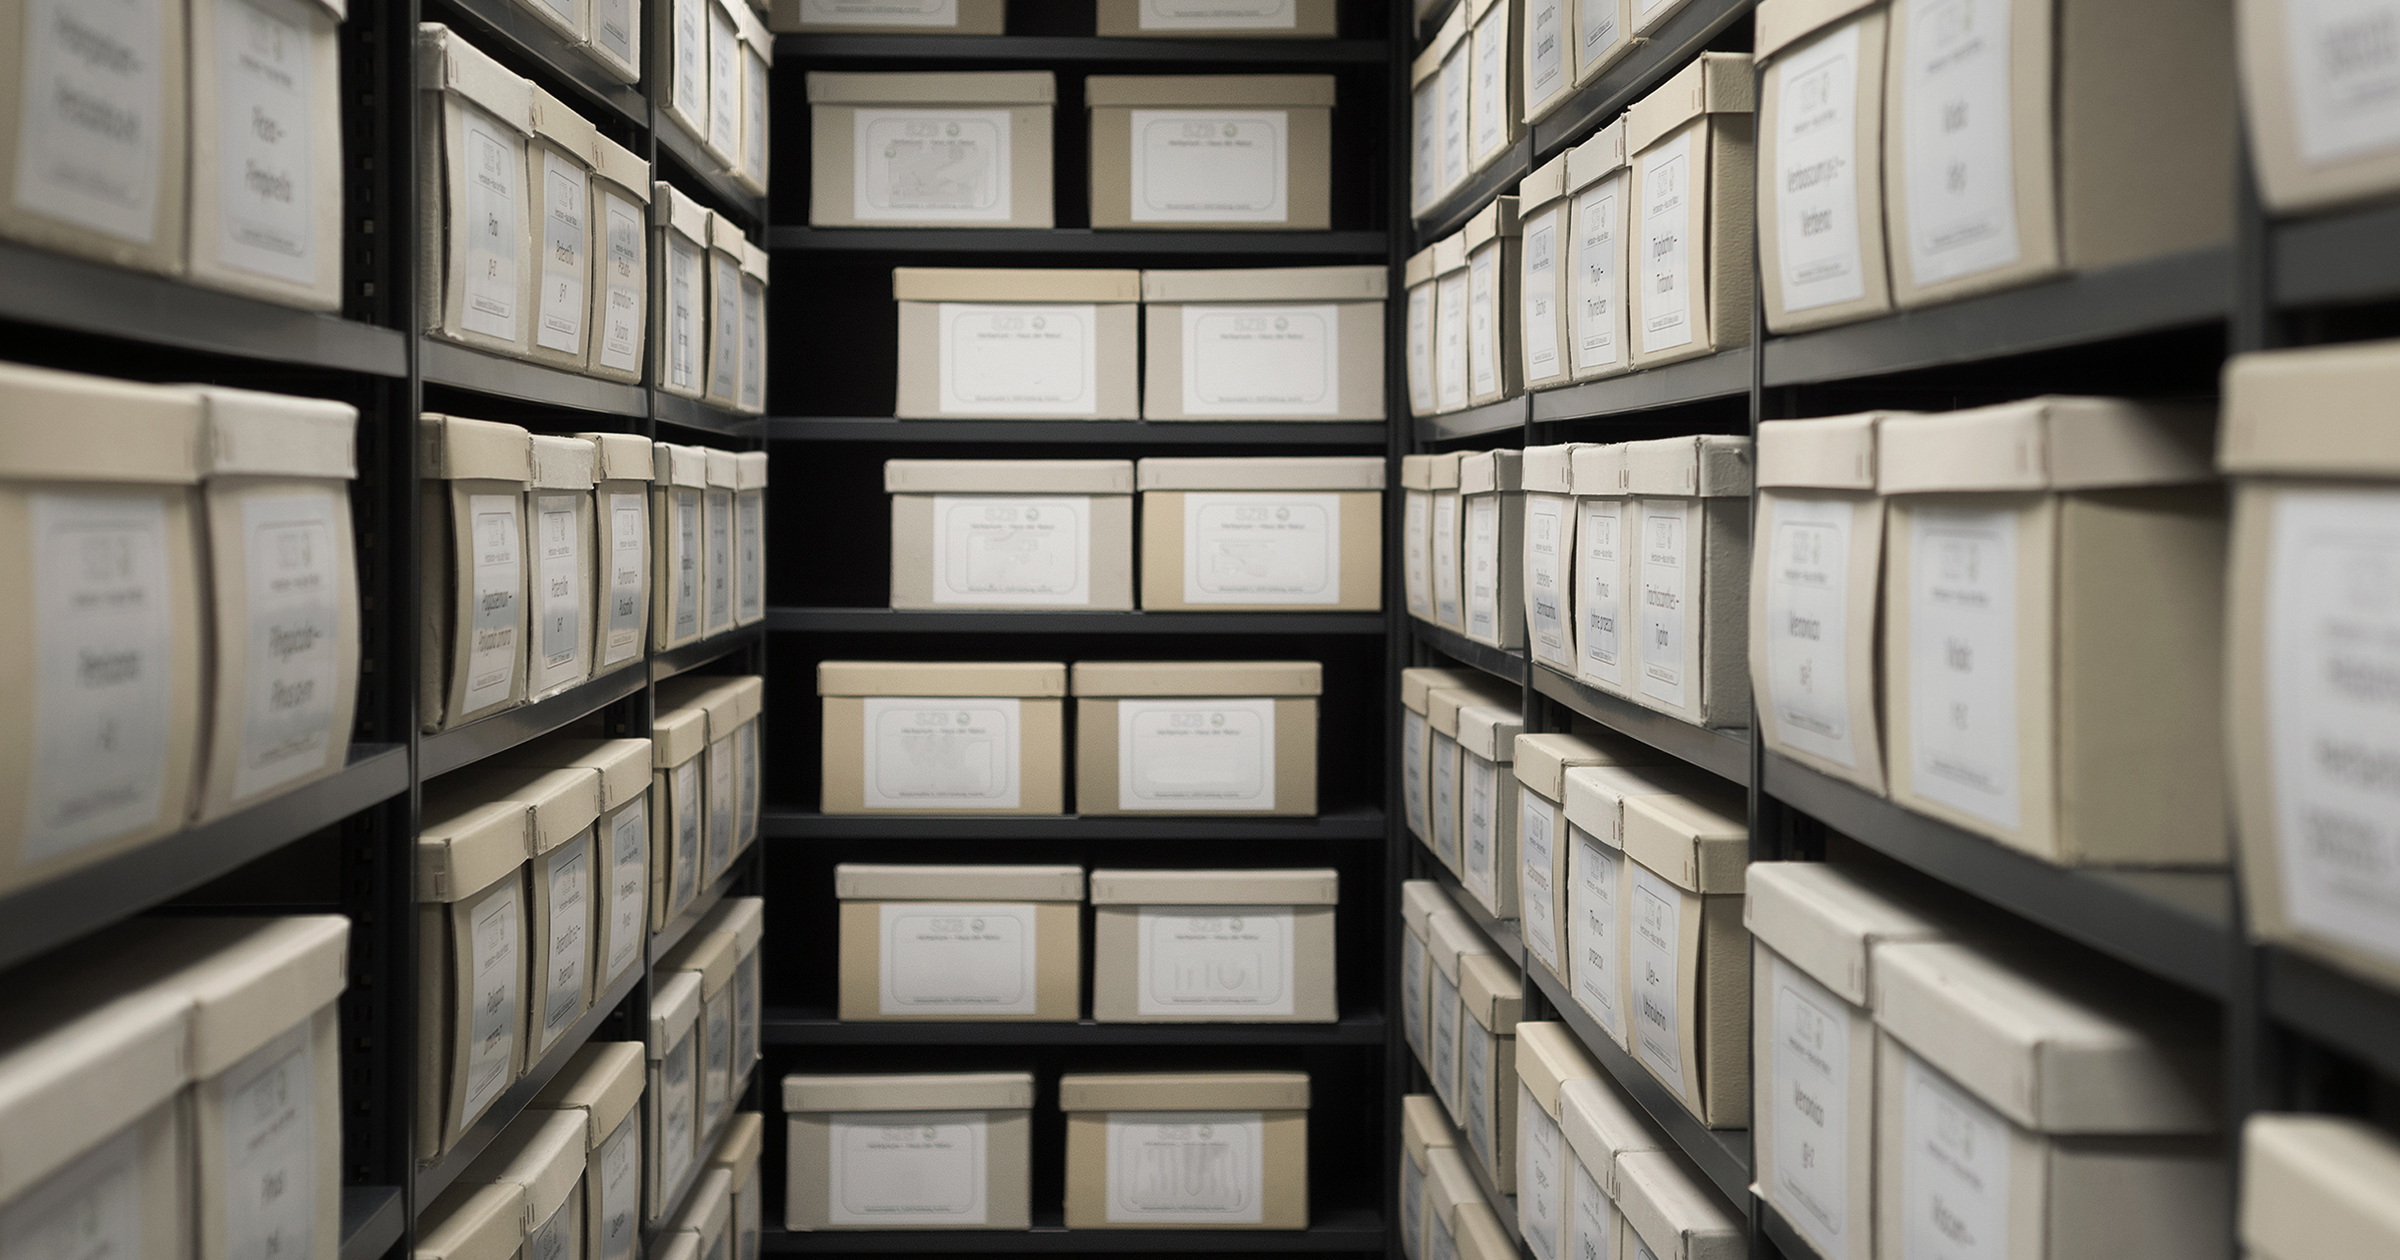 Digitizing and indexing over 200,000 existing case files